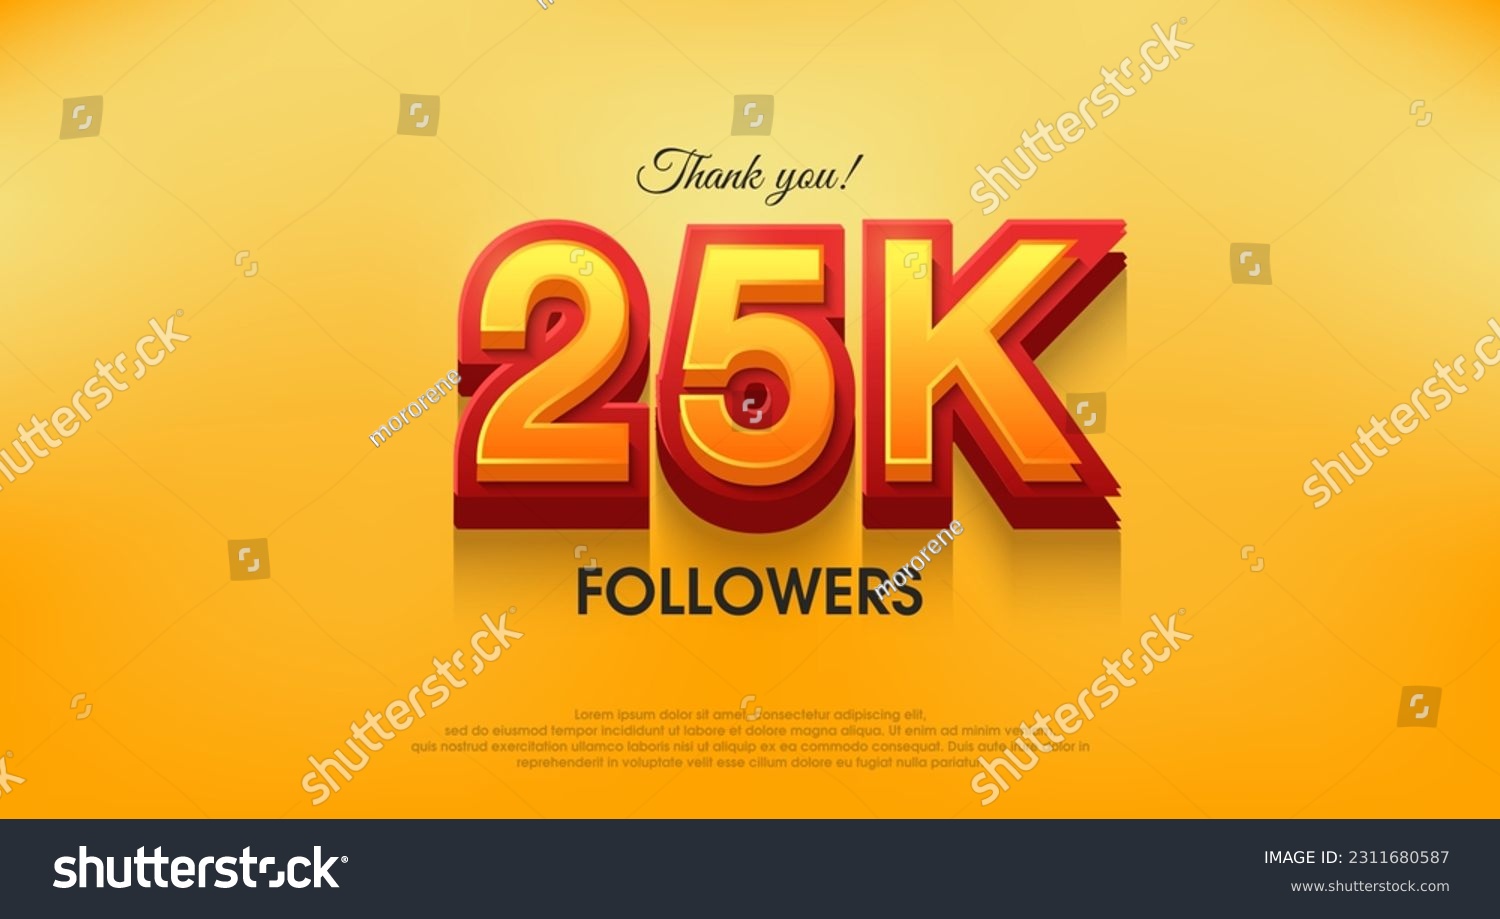 SVG of Thank you 25k followers 3d design, vector background thank you. svg